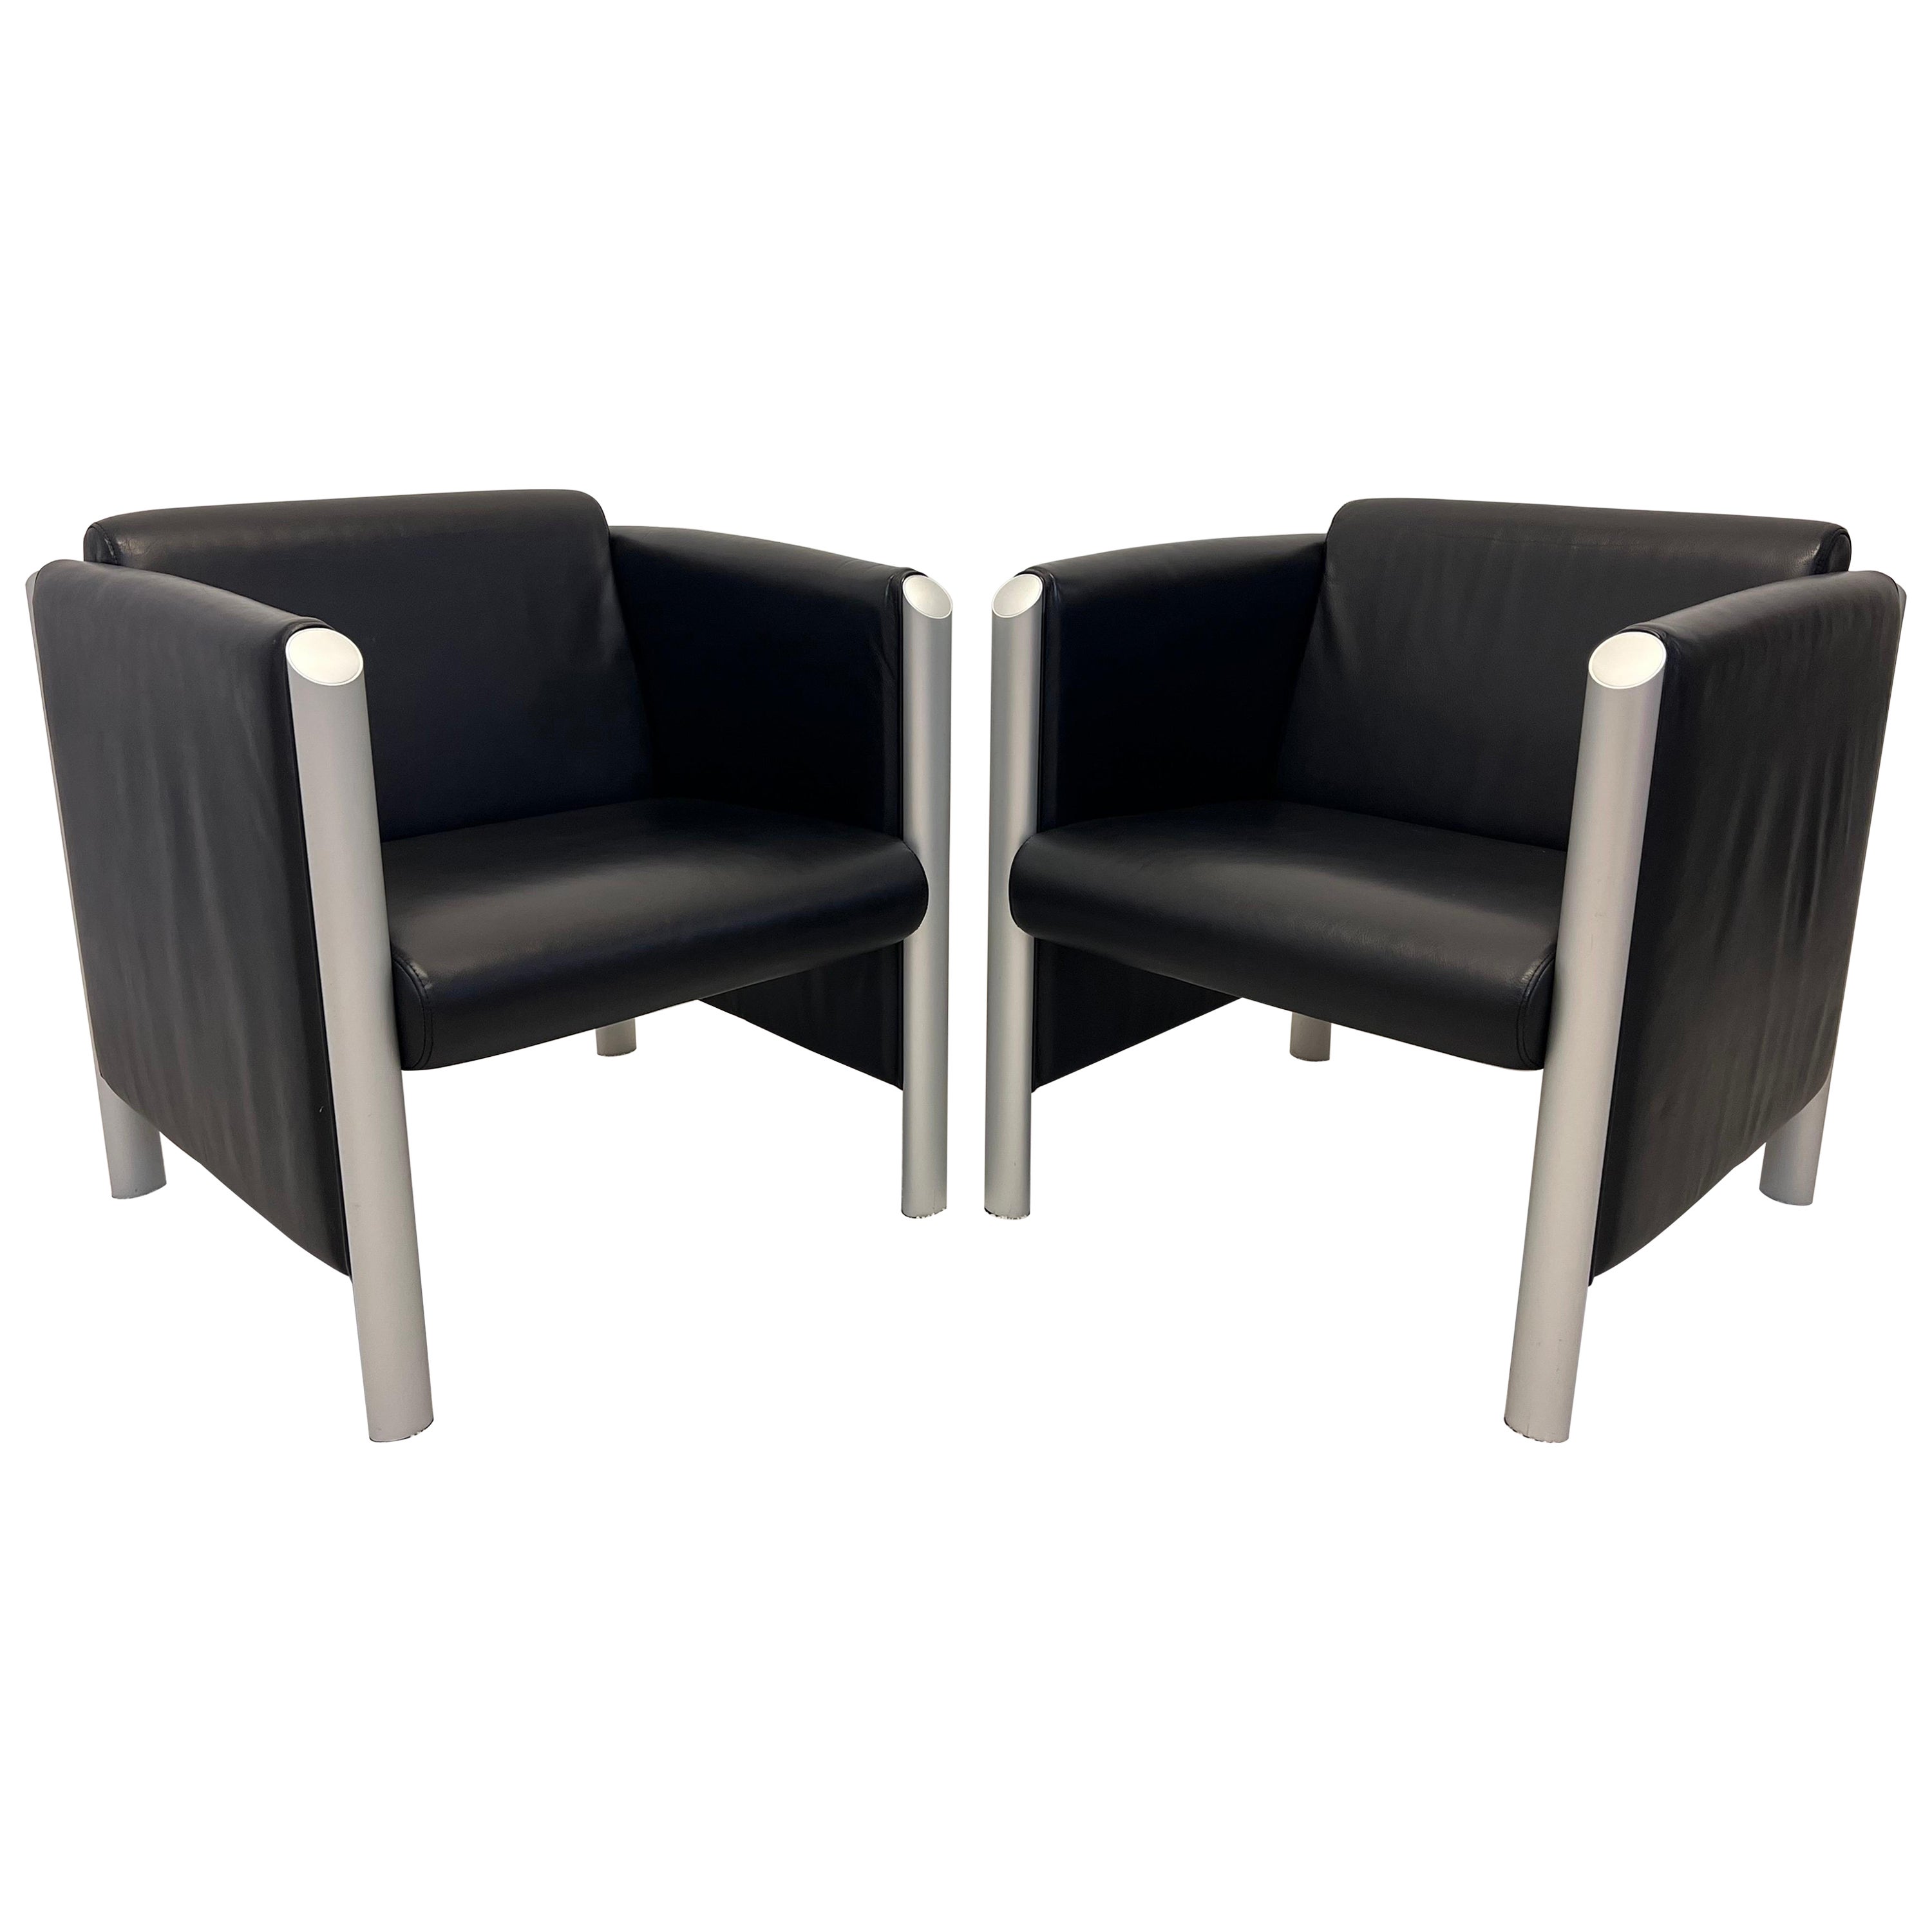 Klaus Franck and Werner Sauer 830 Cubis Chairs for Wilkhahn, a Pair For Sale